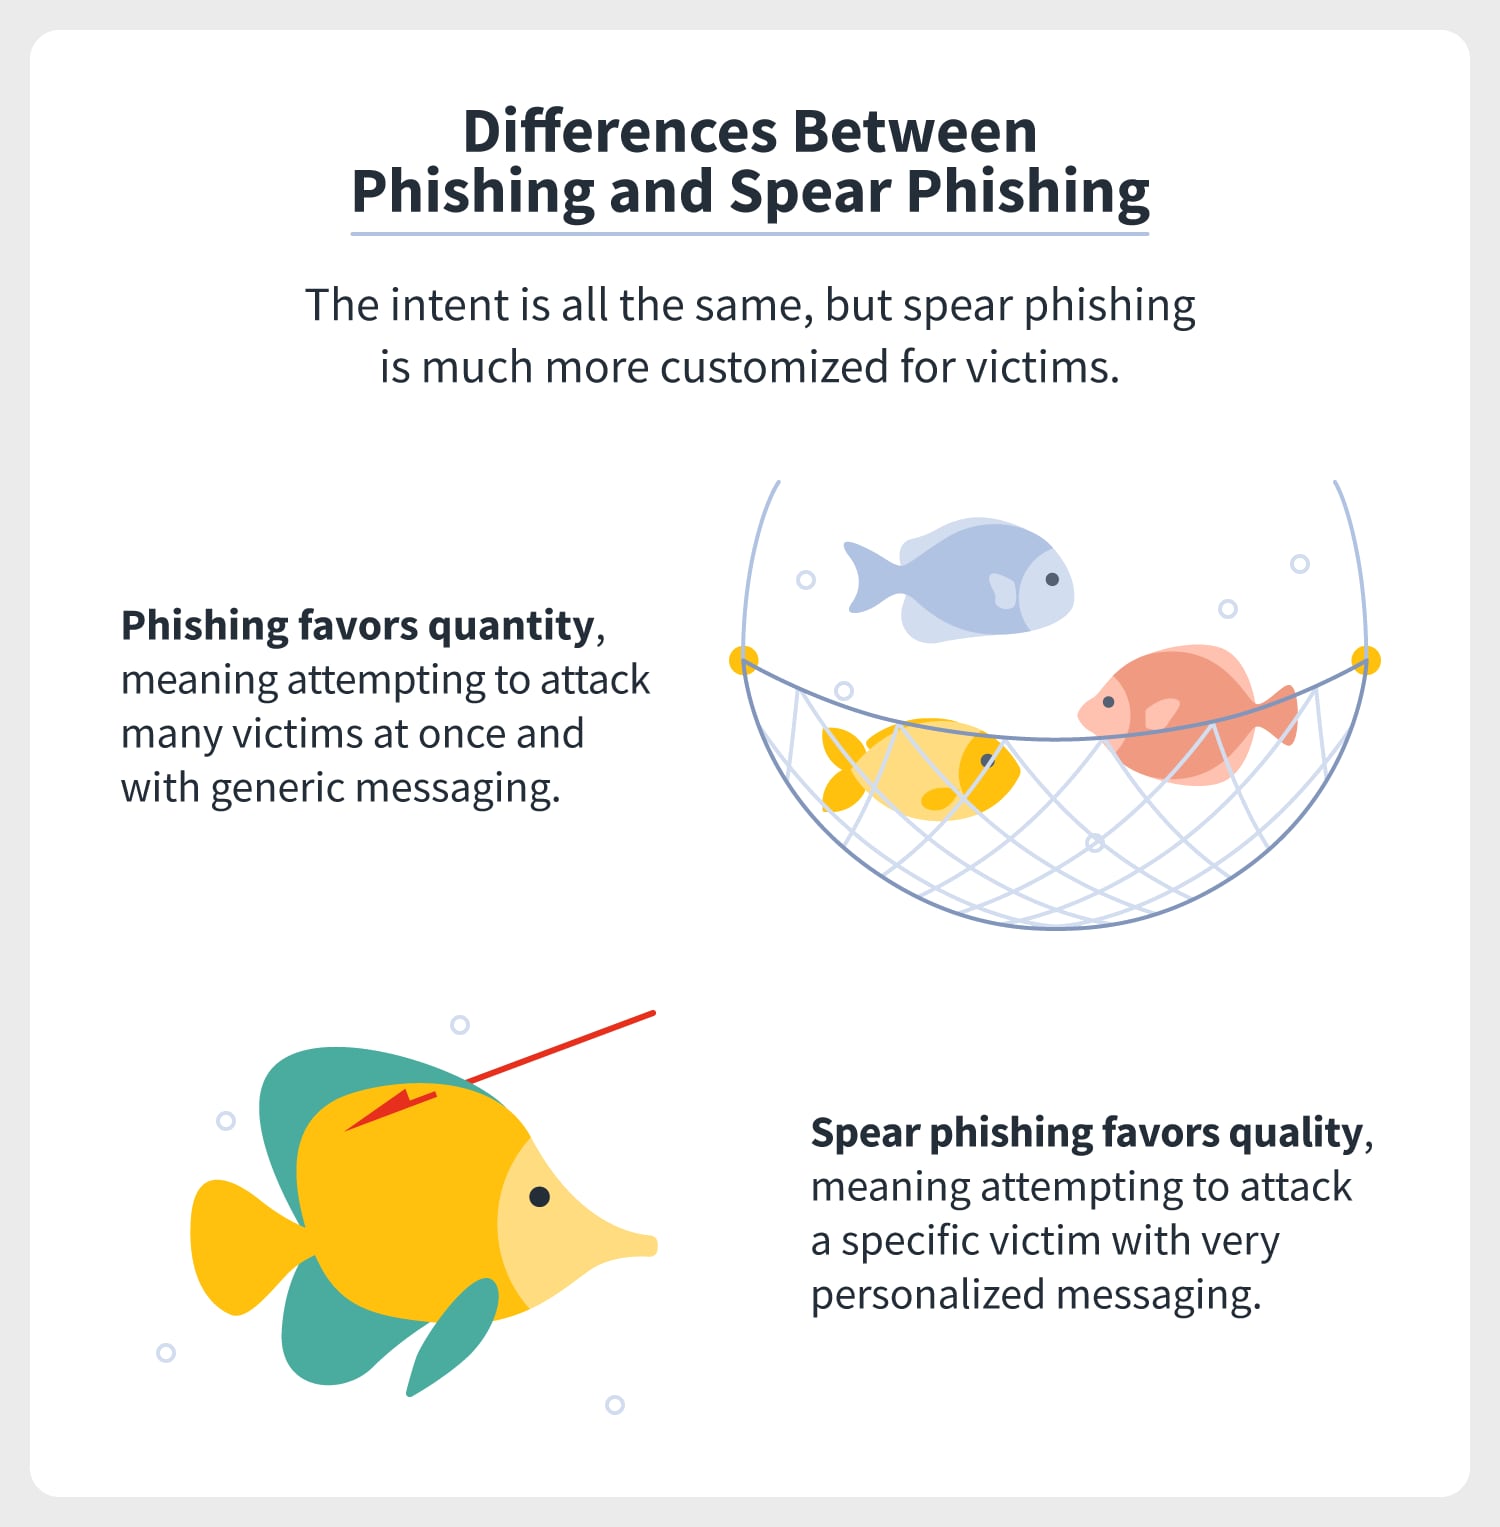 to show the differences between phishing and spear phishing an illustration of several fish being caught in a net represents phishing, while a single fish being speared represents phishing